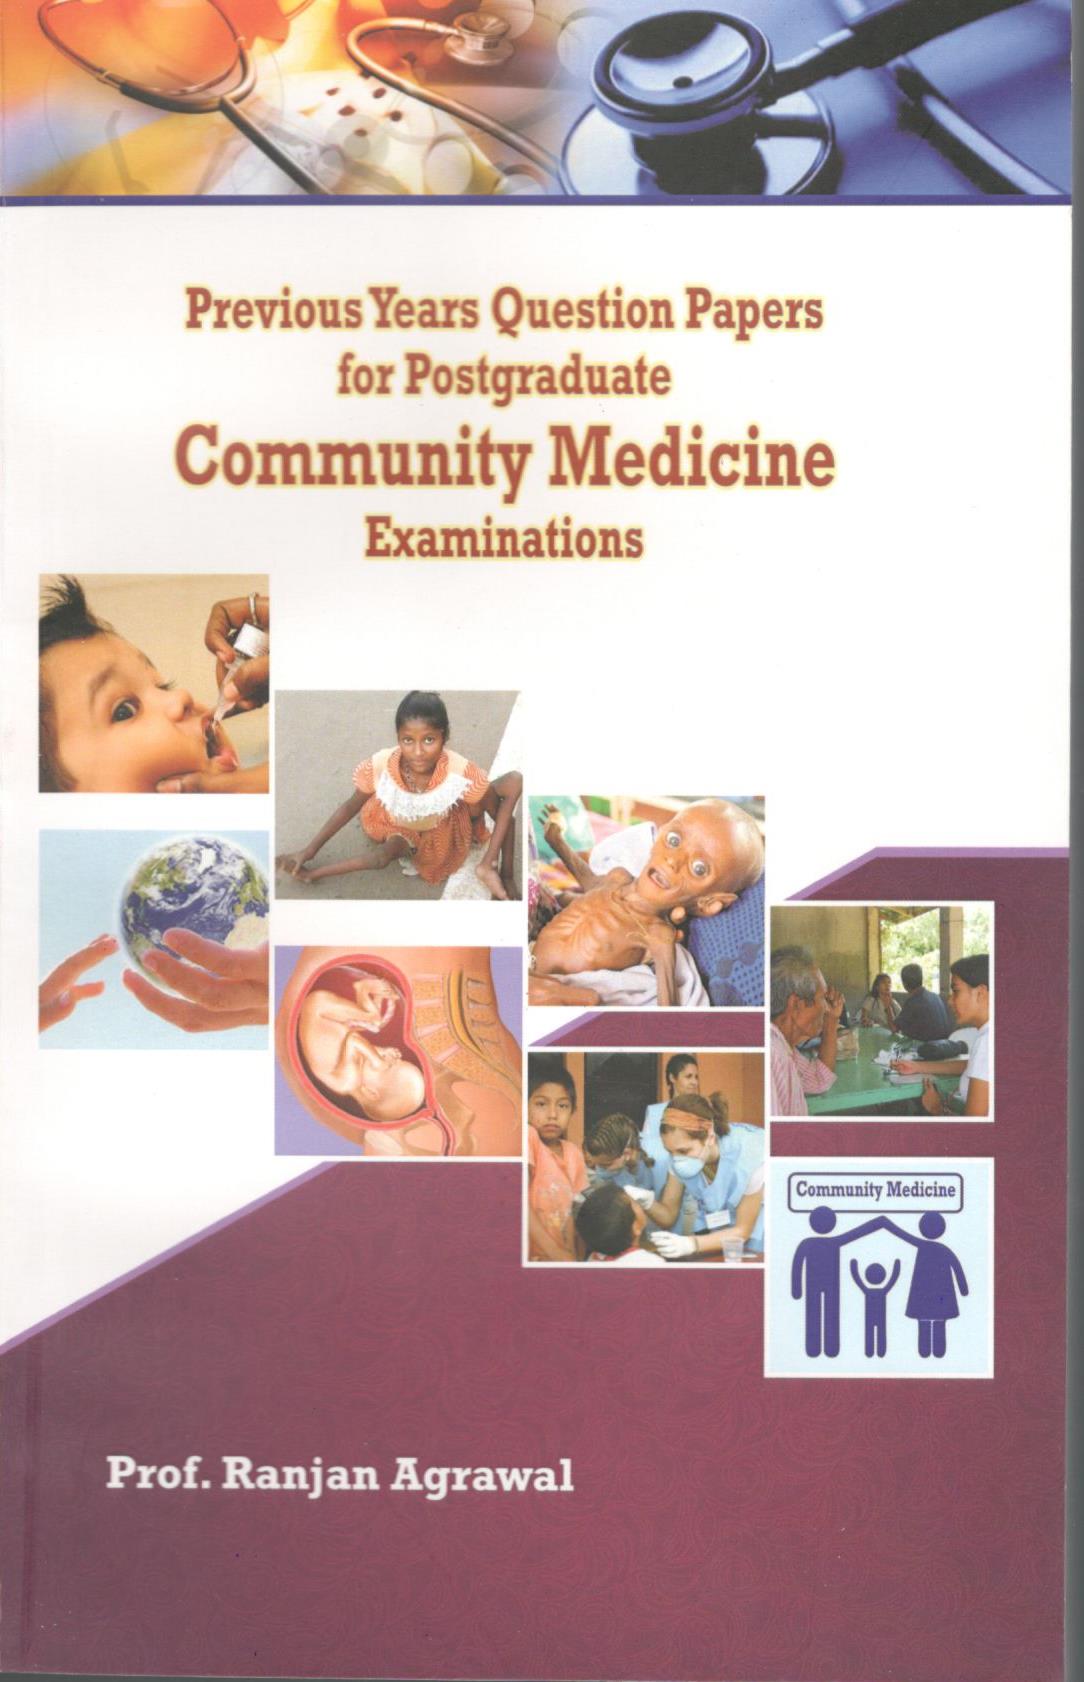 previous-years-question-papers-for-postgraduate-community-medicine-examinations